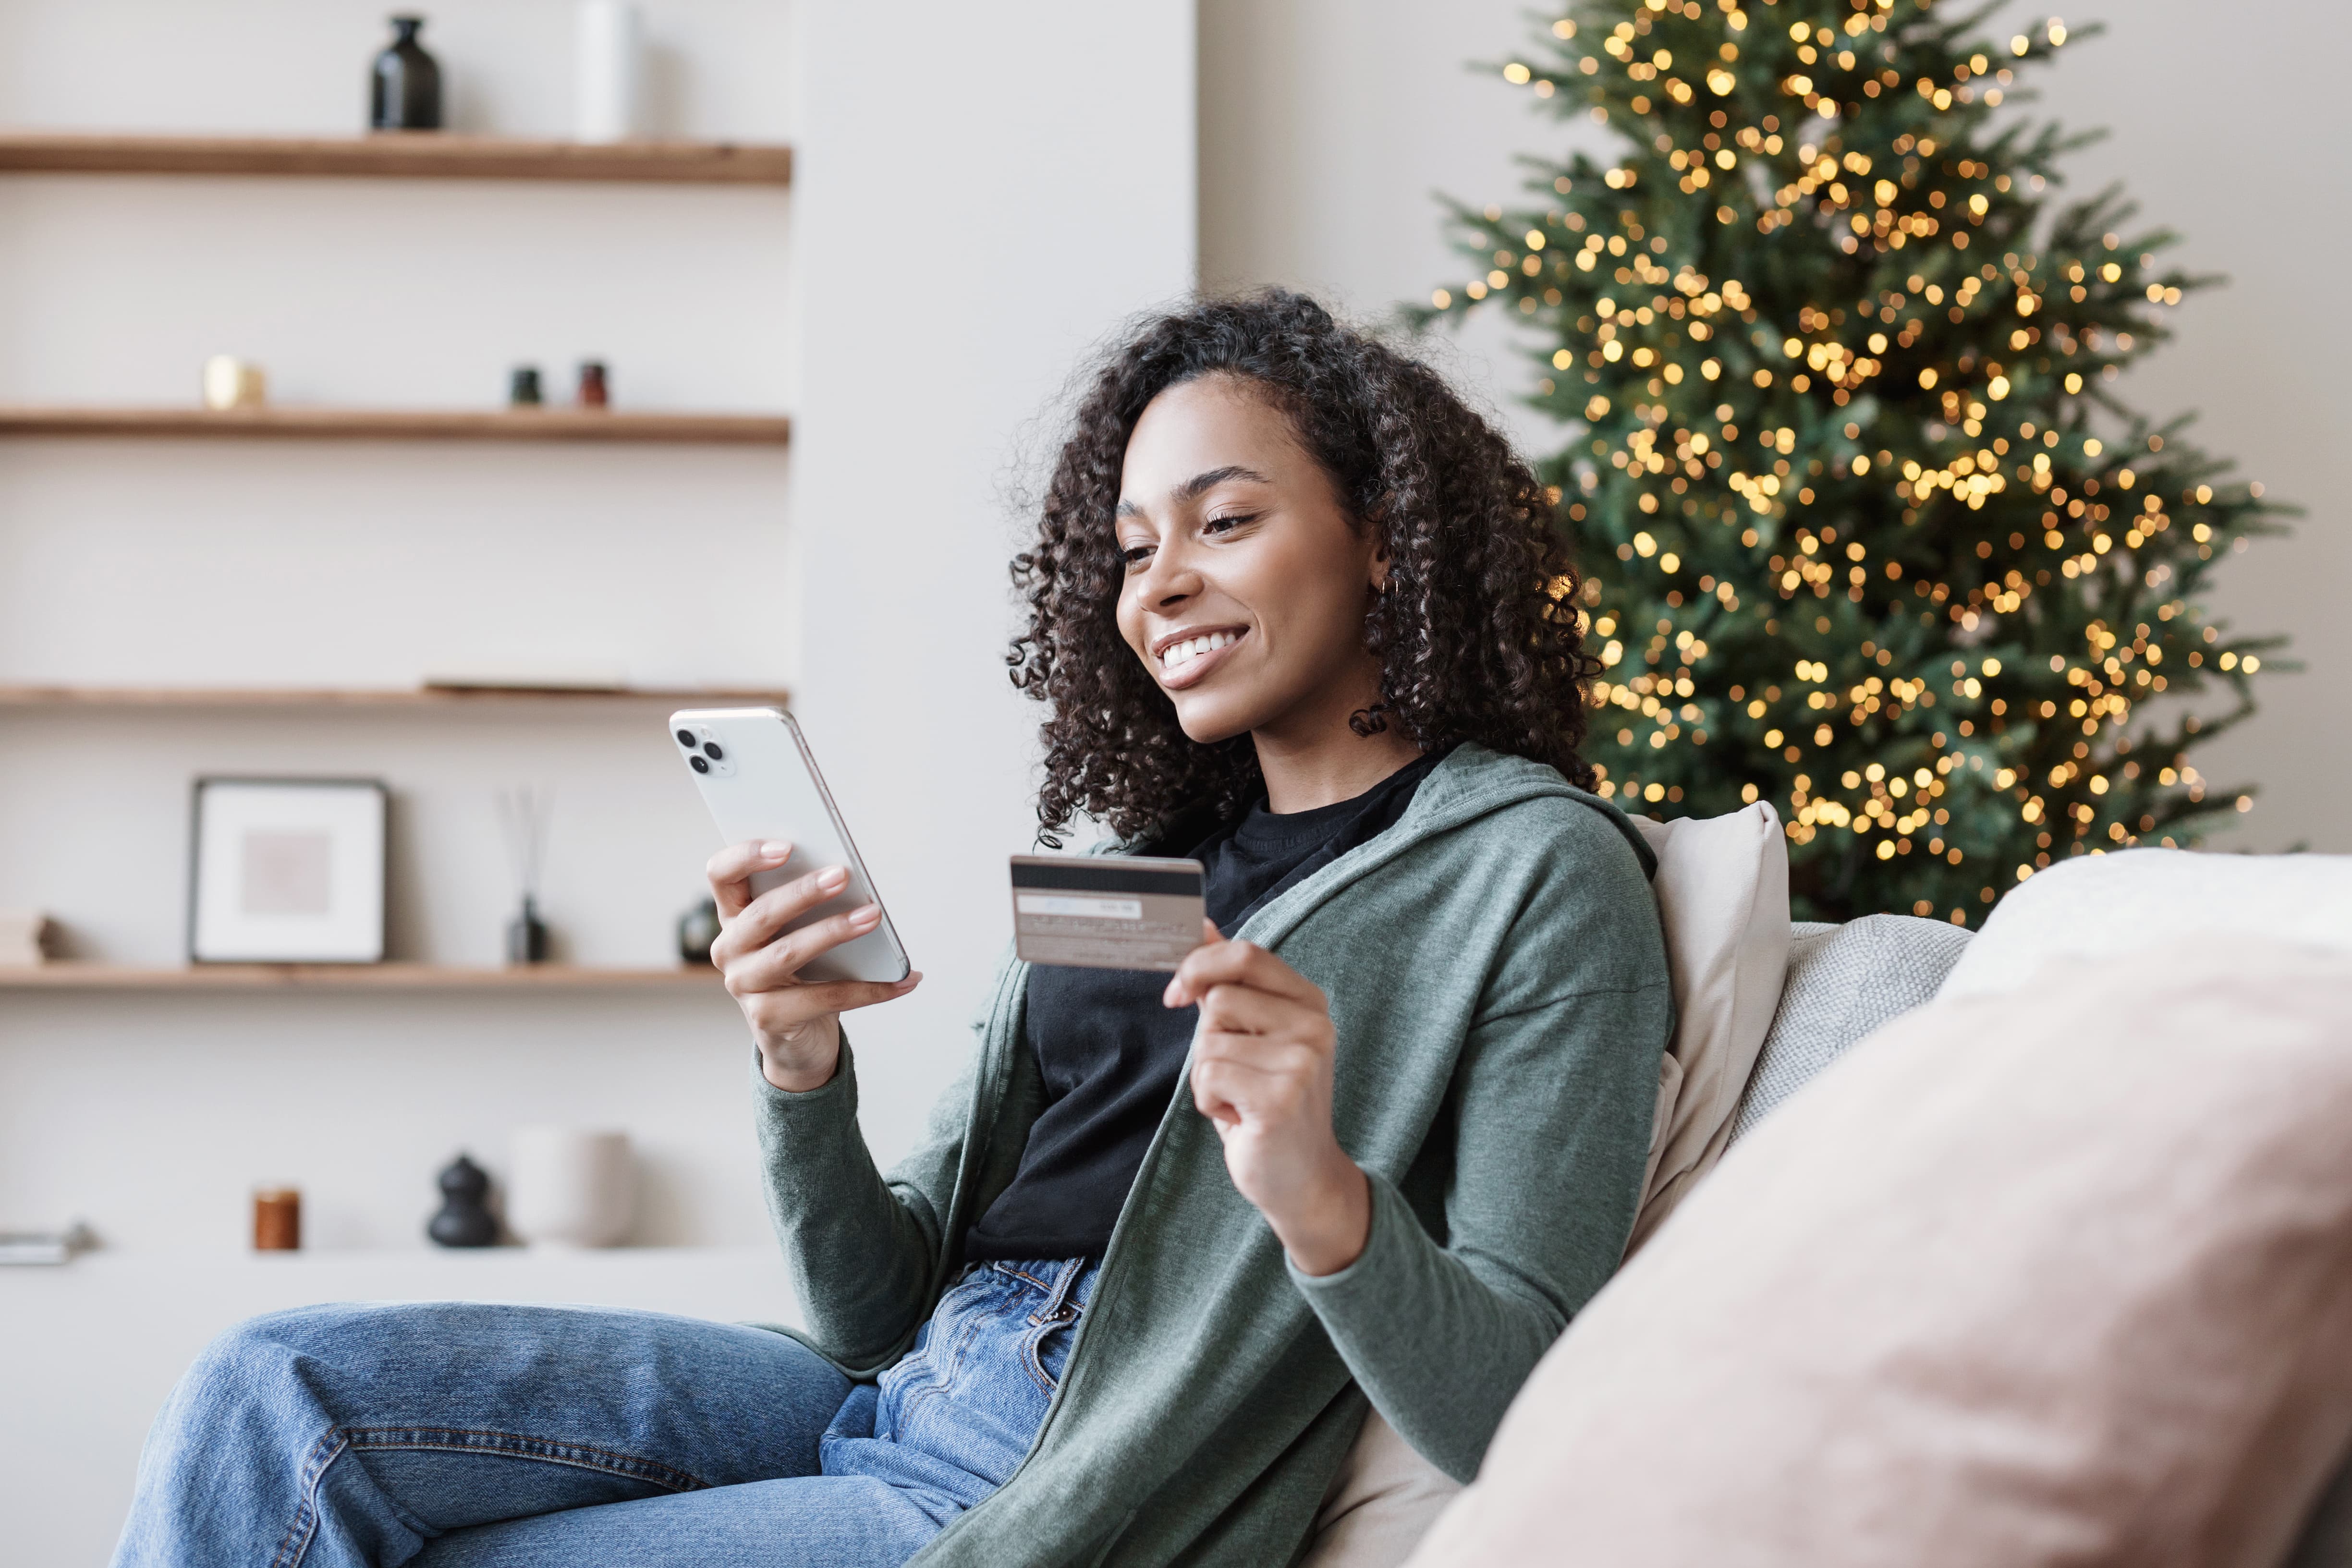 Take care of your credit score during the holiday season